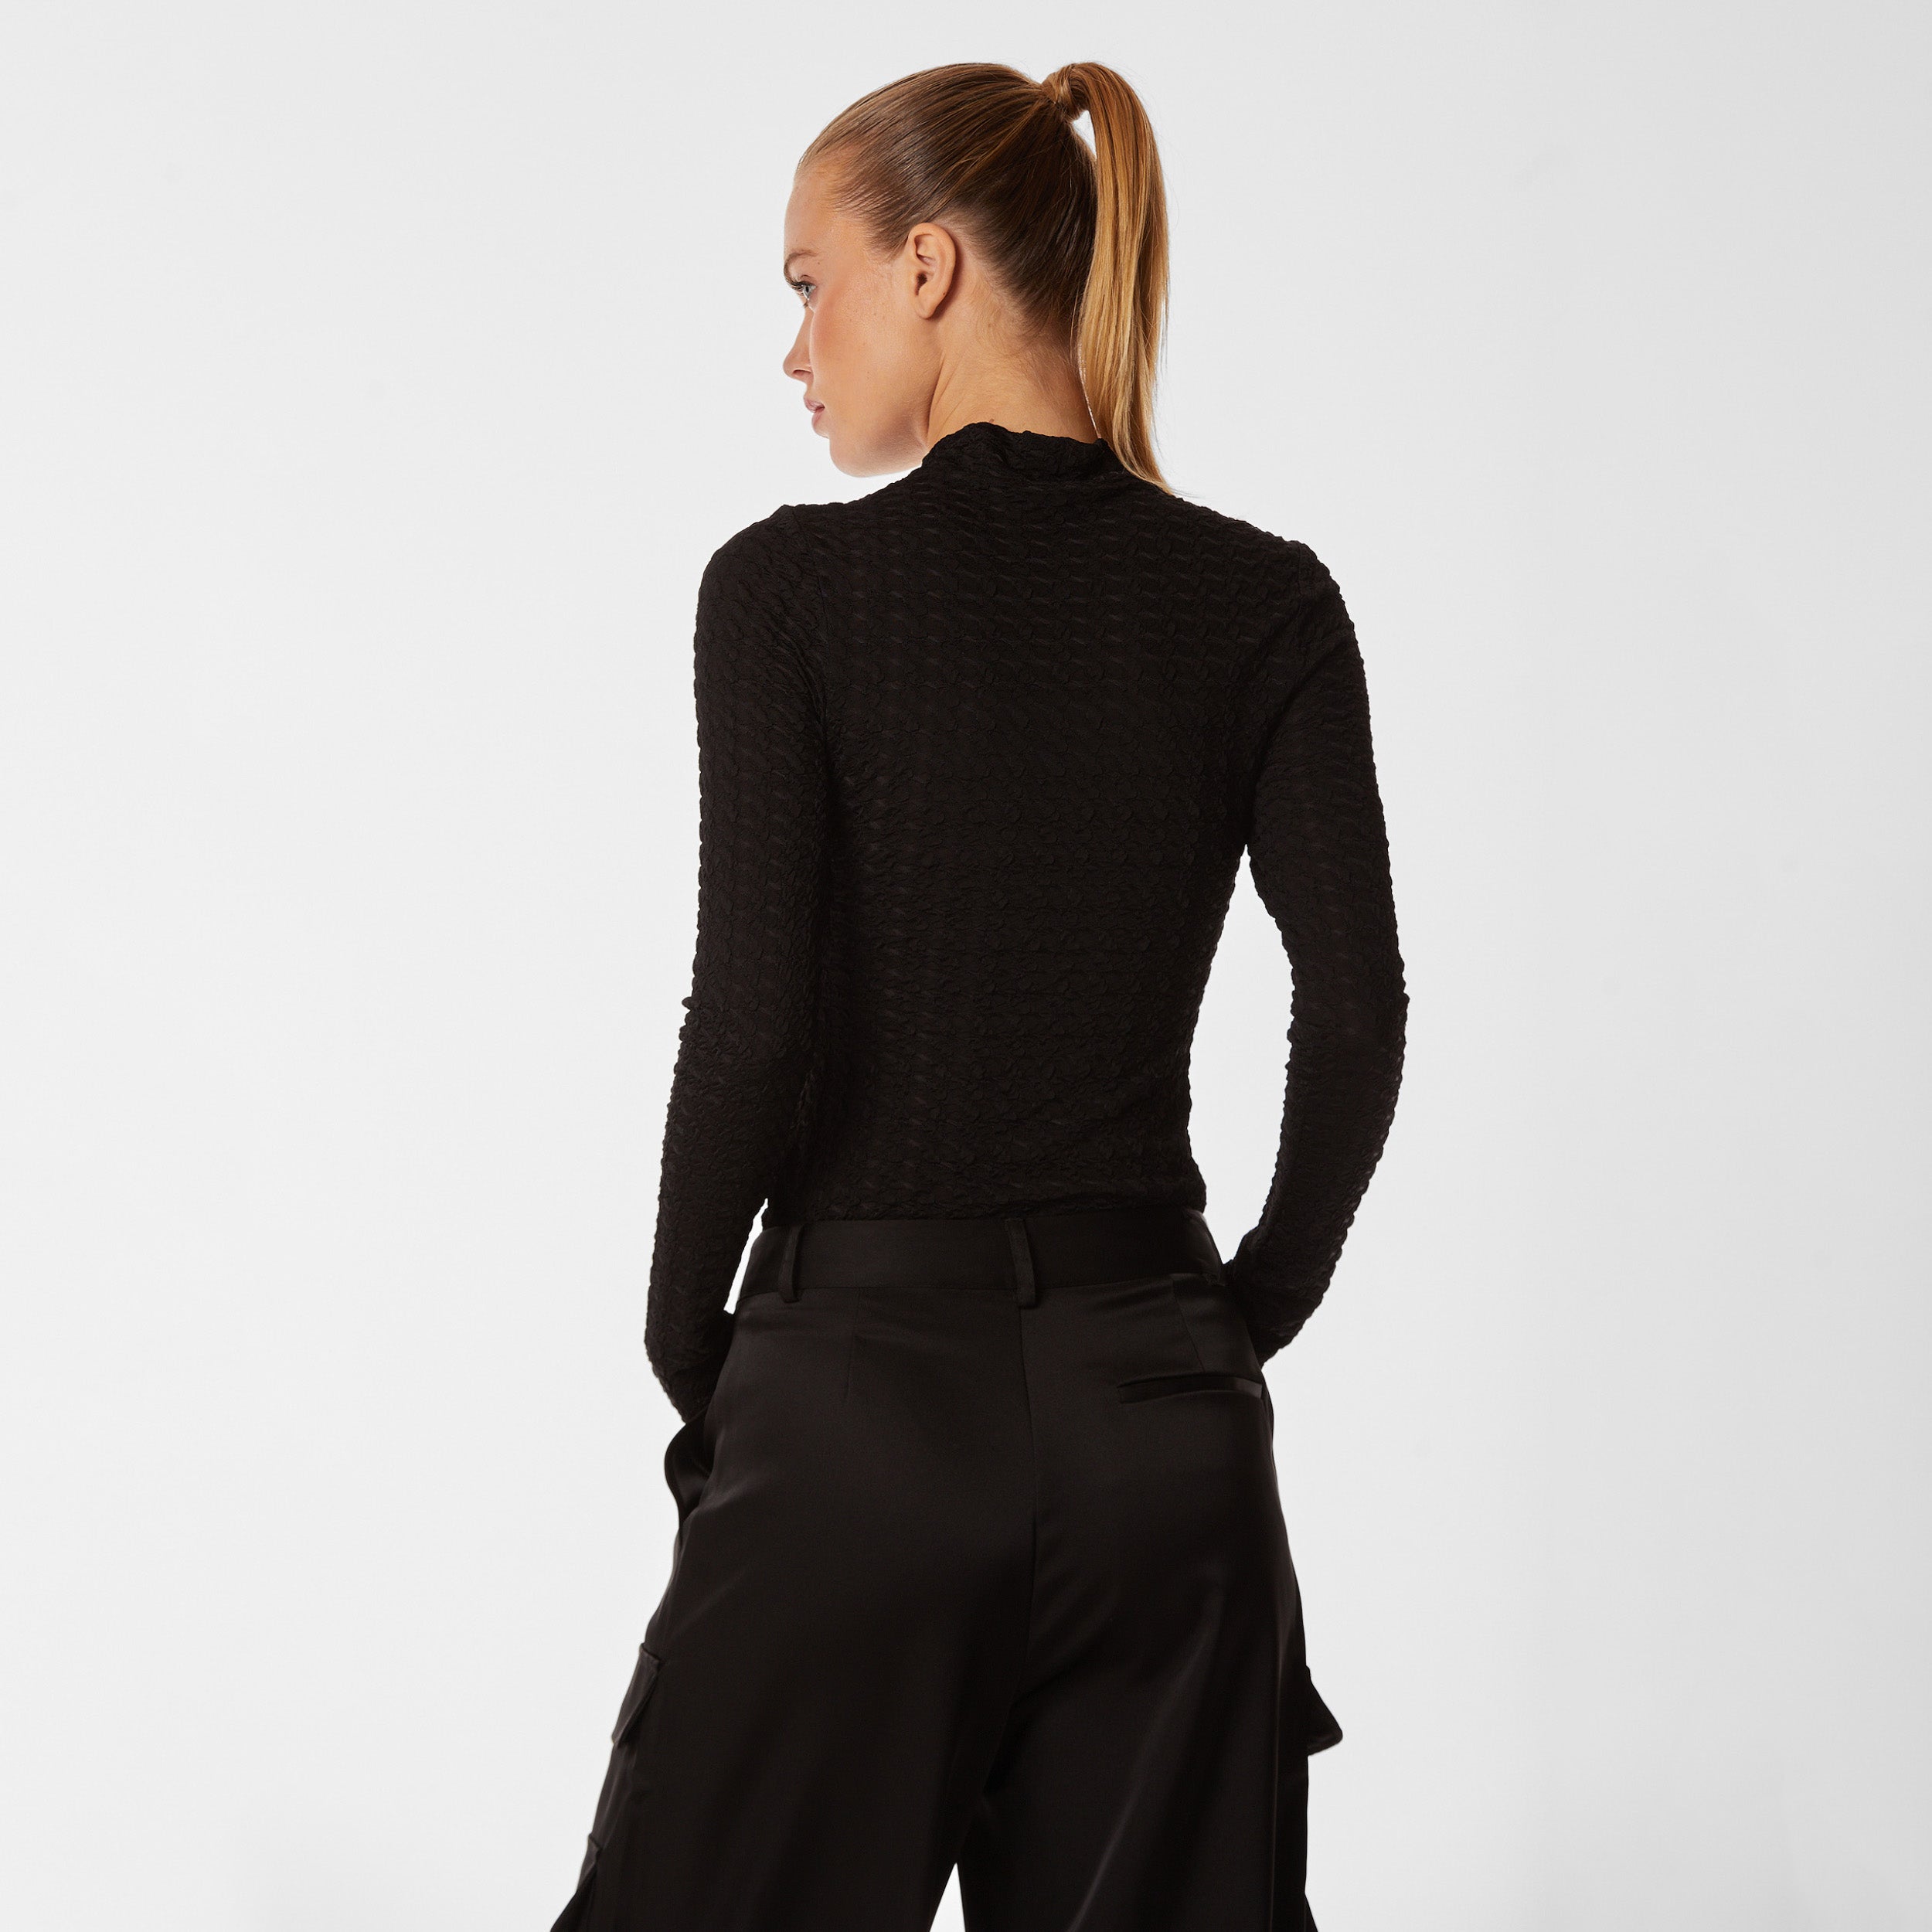 Rear view of woman wearing black stretch mesh textured turtleneck sweater